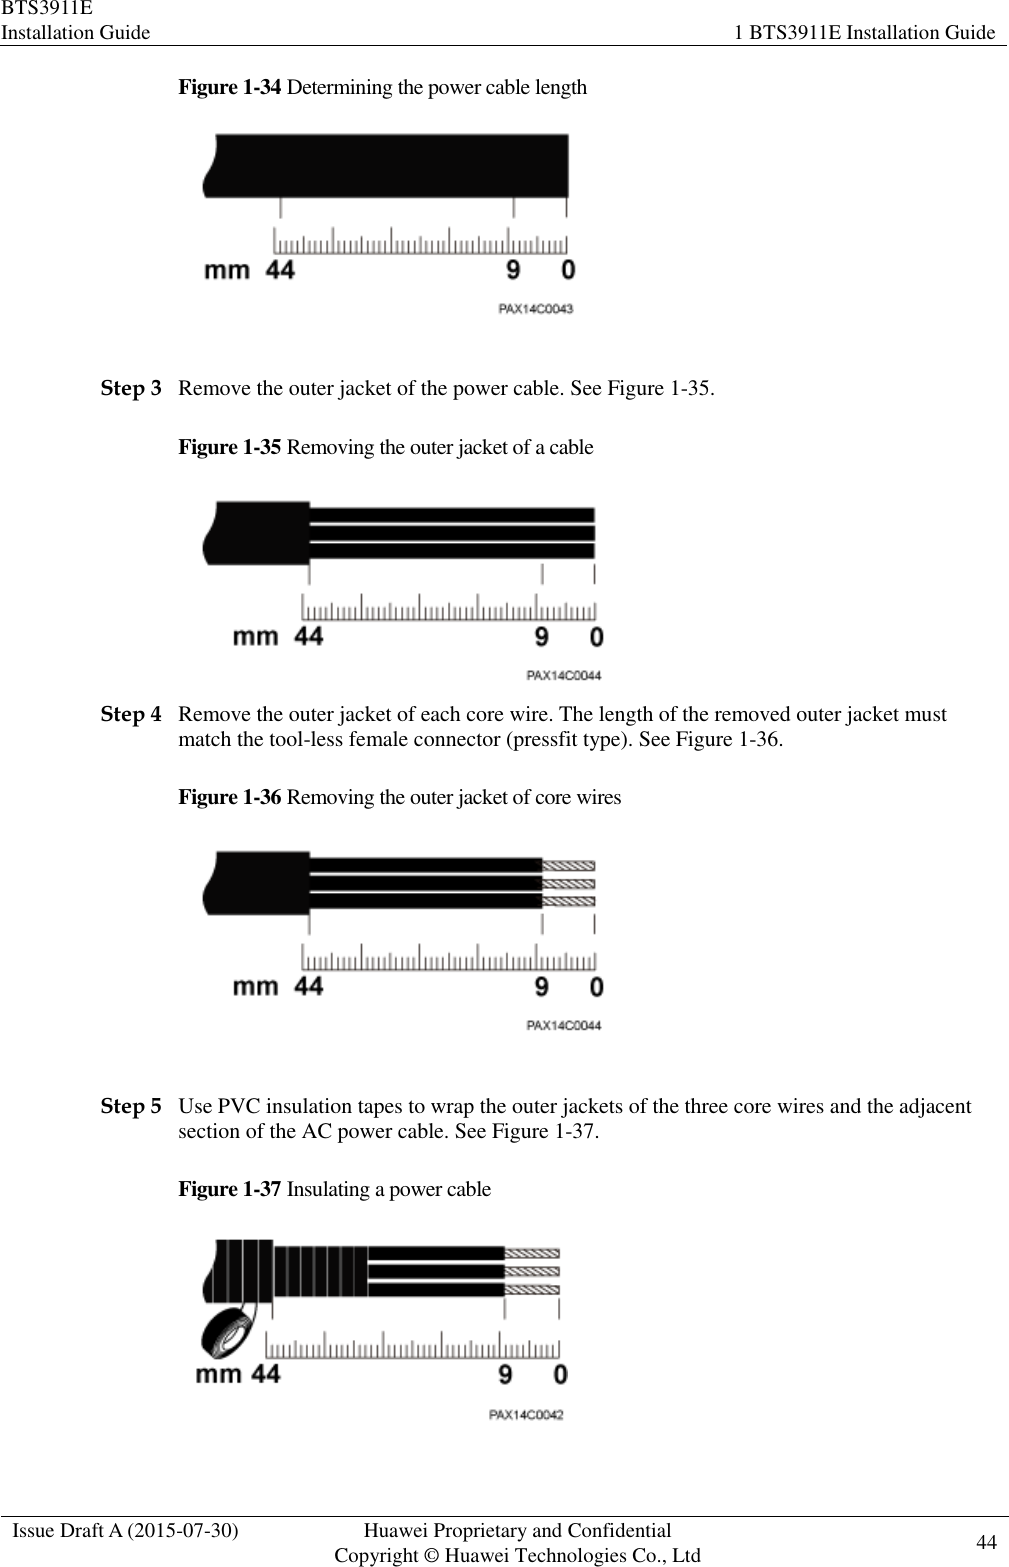 BTS3911E Installation Guide 1 BTS3911E Installation Guide  Issue Draft A (2015-07-30) Huawei Proprietary and Confidential           Copyright © Huawei Technologies Co., Ltd 44    Figure 1-34 Determining the power cable length   Step 3 Remove the outer jacket of the power cable. See Figure 1-35. Figure 1-35 Removing the outer jacket of a cable  Step 4 Remove the outer jacket of each core wire. The length of the removed outer jacket must match the tool-less female connector (pressfit type). See Figure 1-36. Figure 1-36 Removing the outer jacket of core wires   Step 5 Use PVC insulation tapes to wrap the outer jackets of the three core wires and the adjacent section of the AC power cable. See Figure 1-37. Figure 1-37 Insulating a power cable   